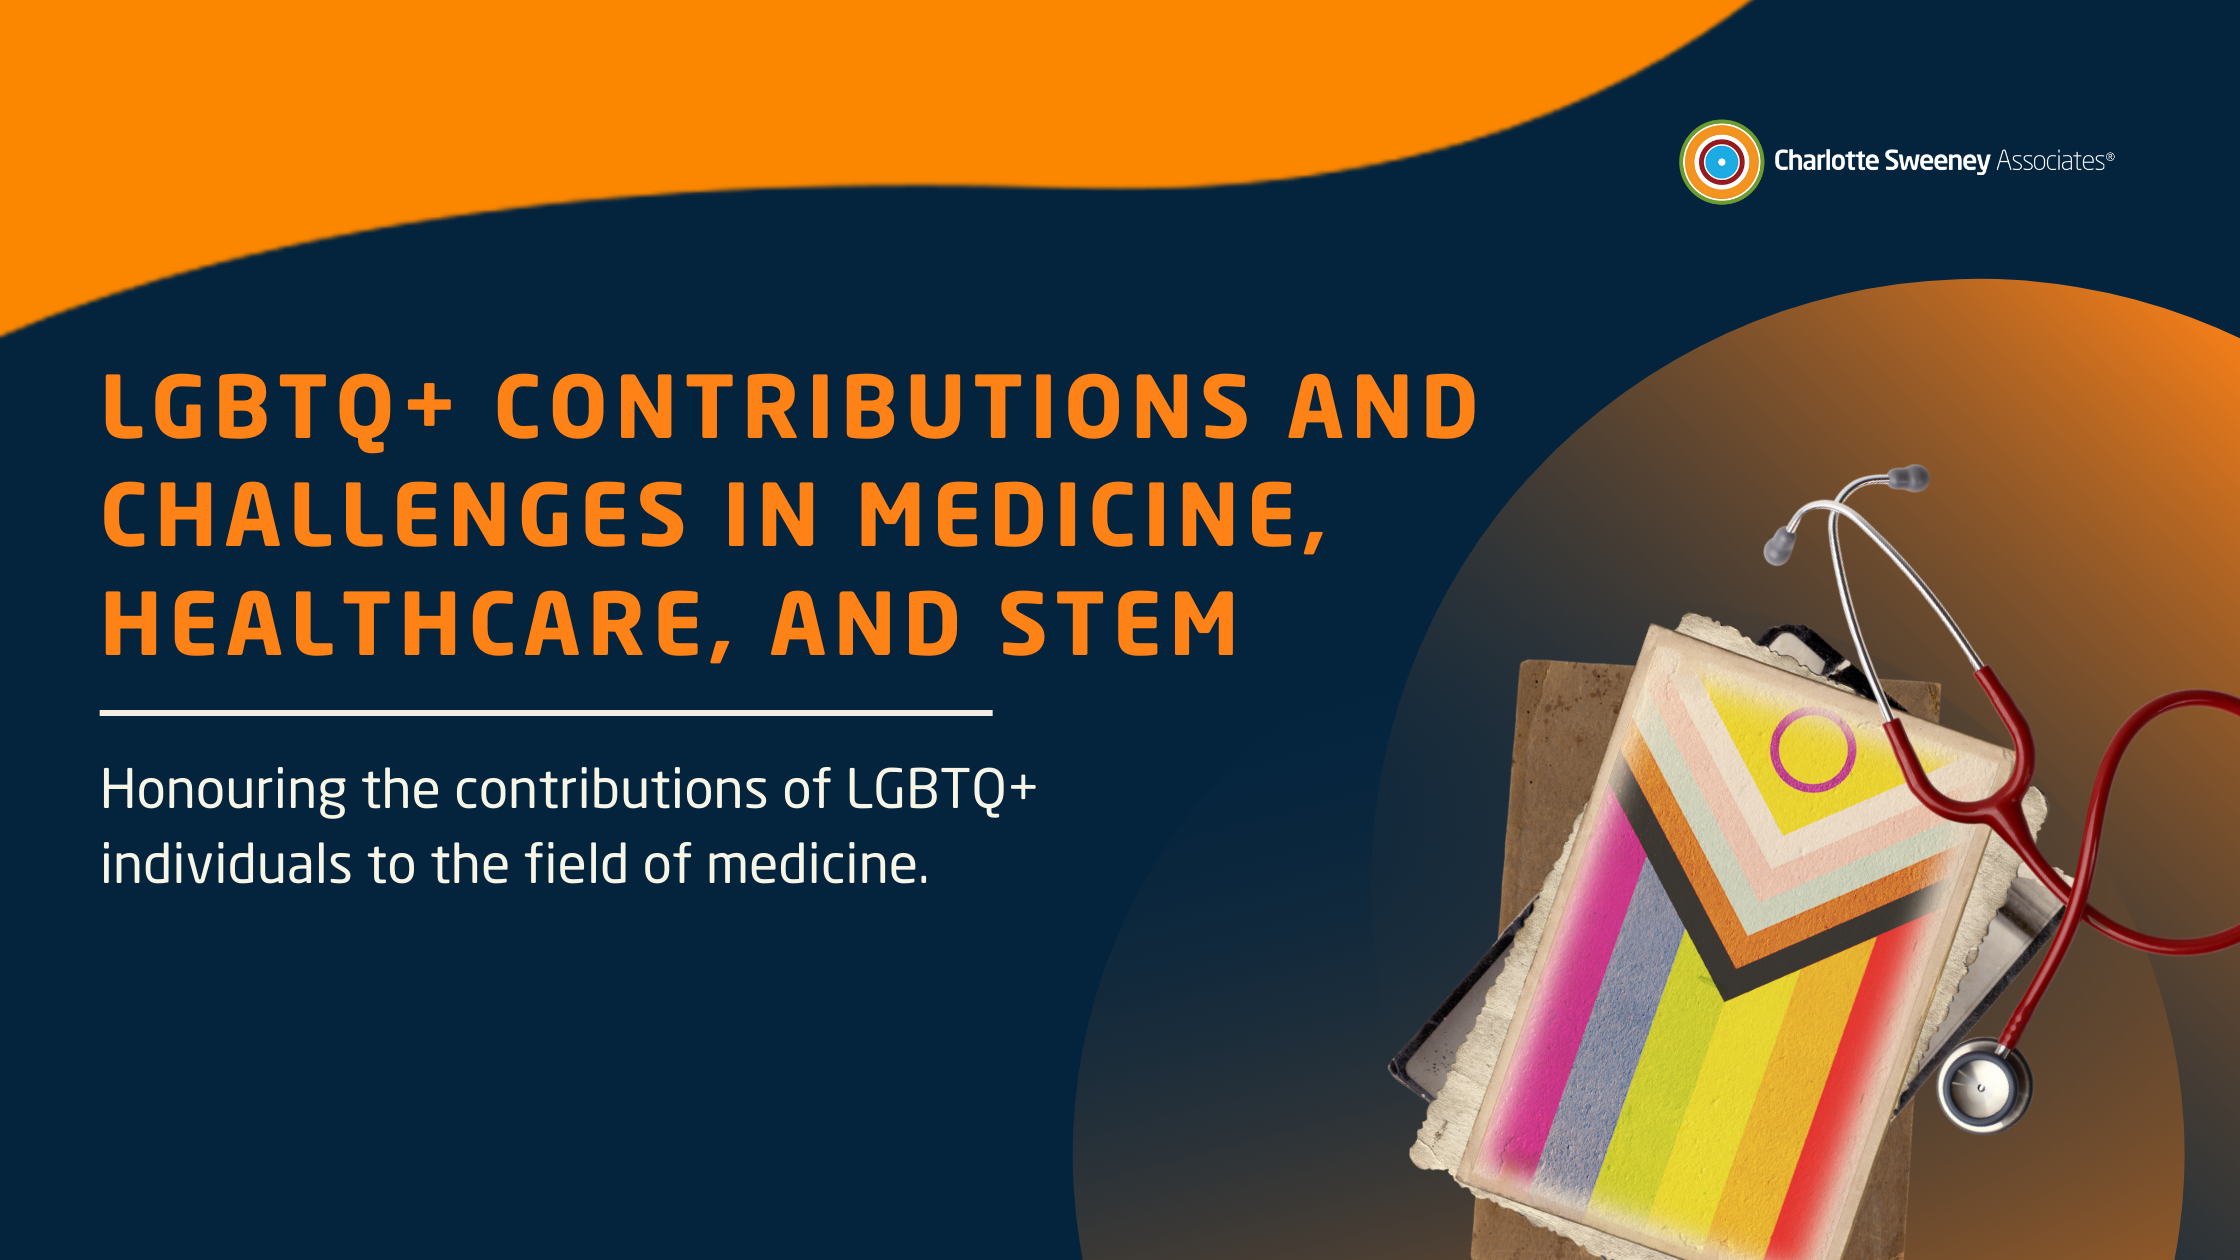 LGBTQ+ Contributions and Challenges in Medicine, Healthcare, and STEM